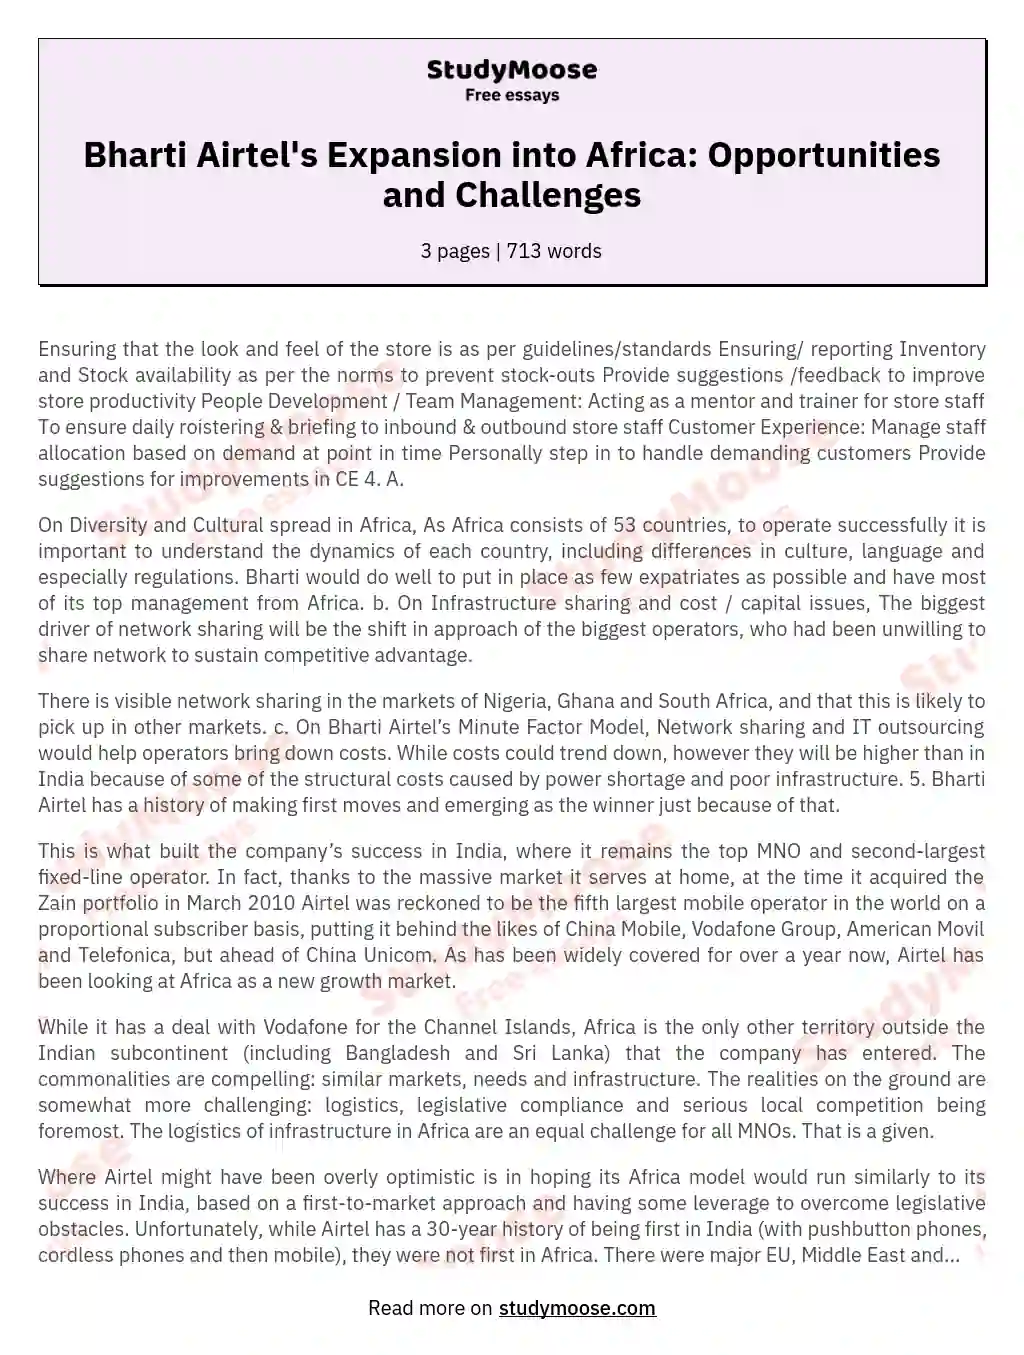 Bharti Airtel's Expansion into Africa: Opportunities and Challenges essay